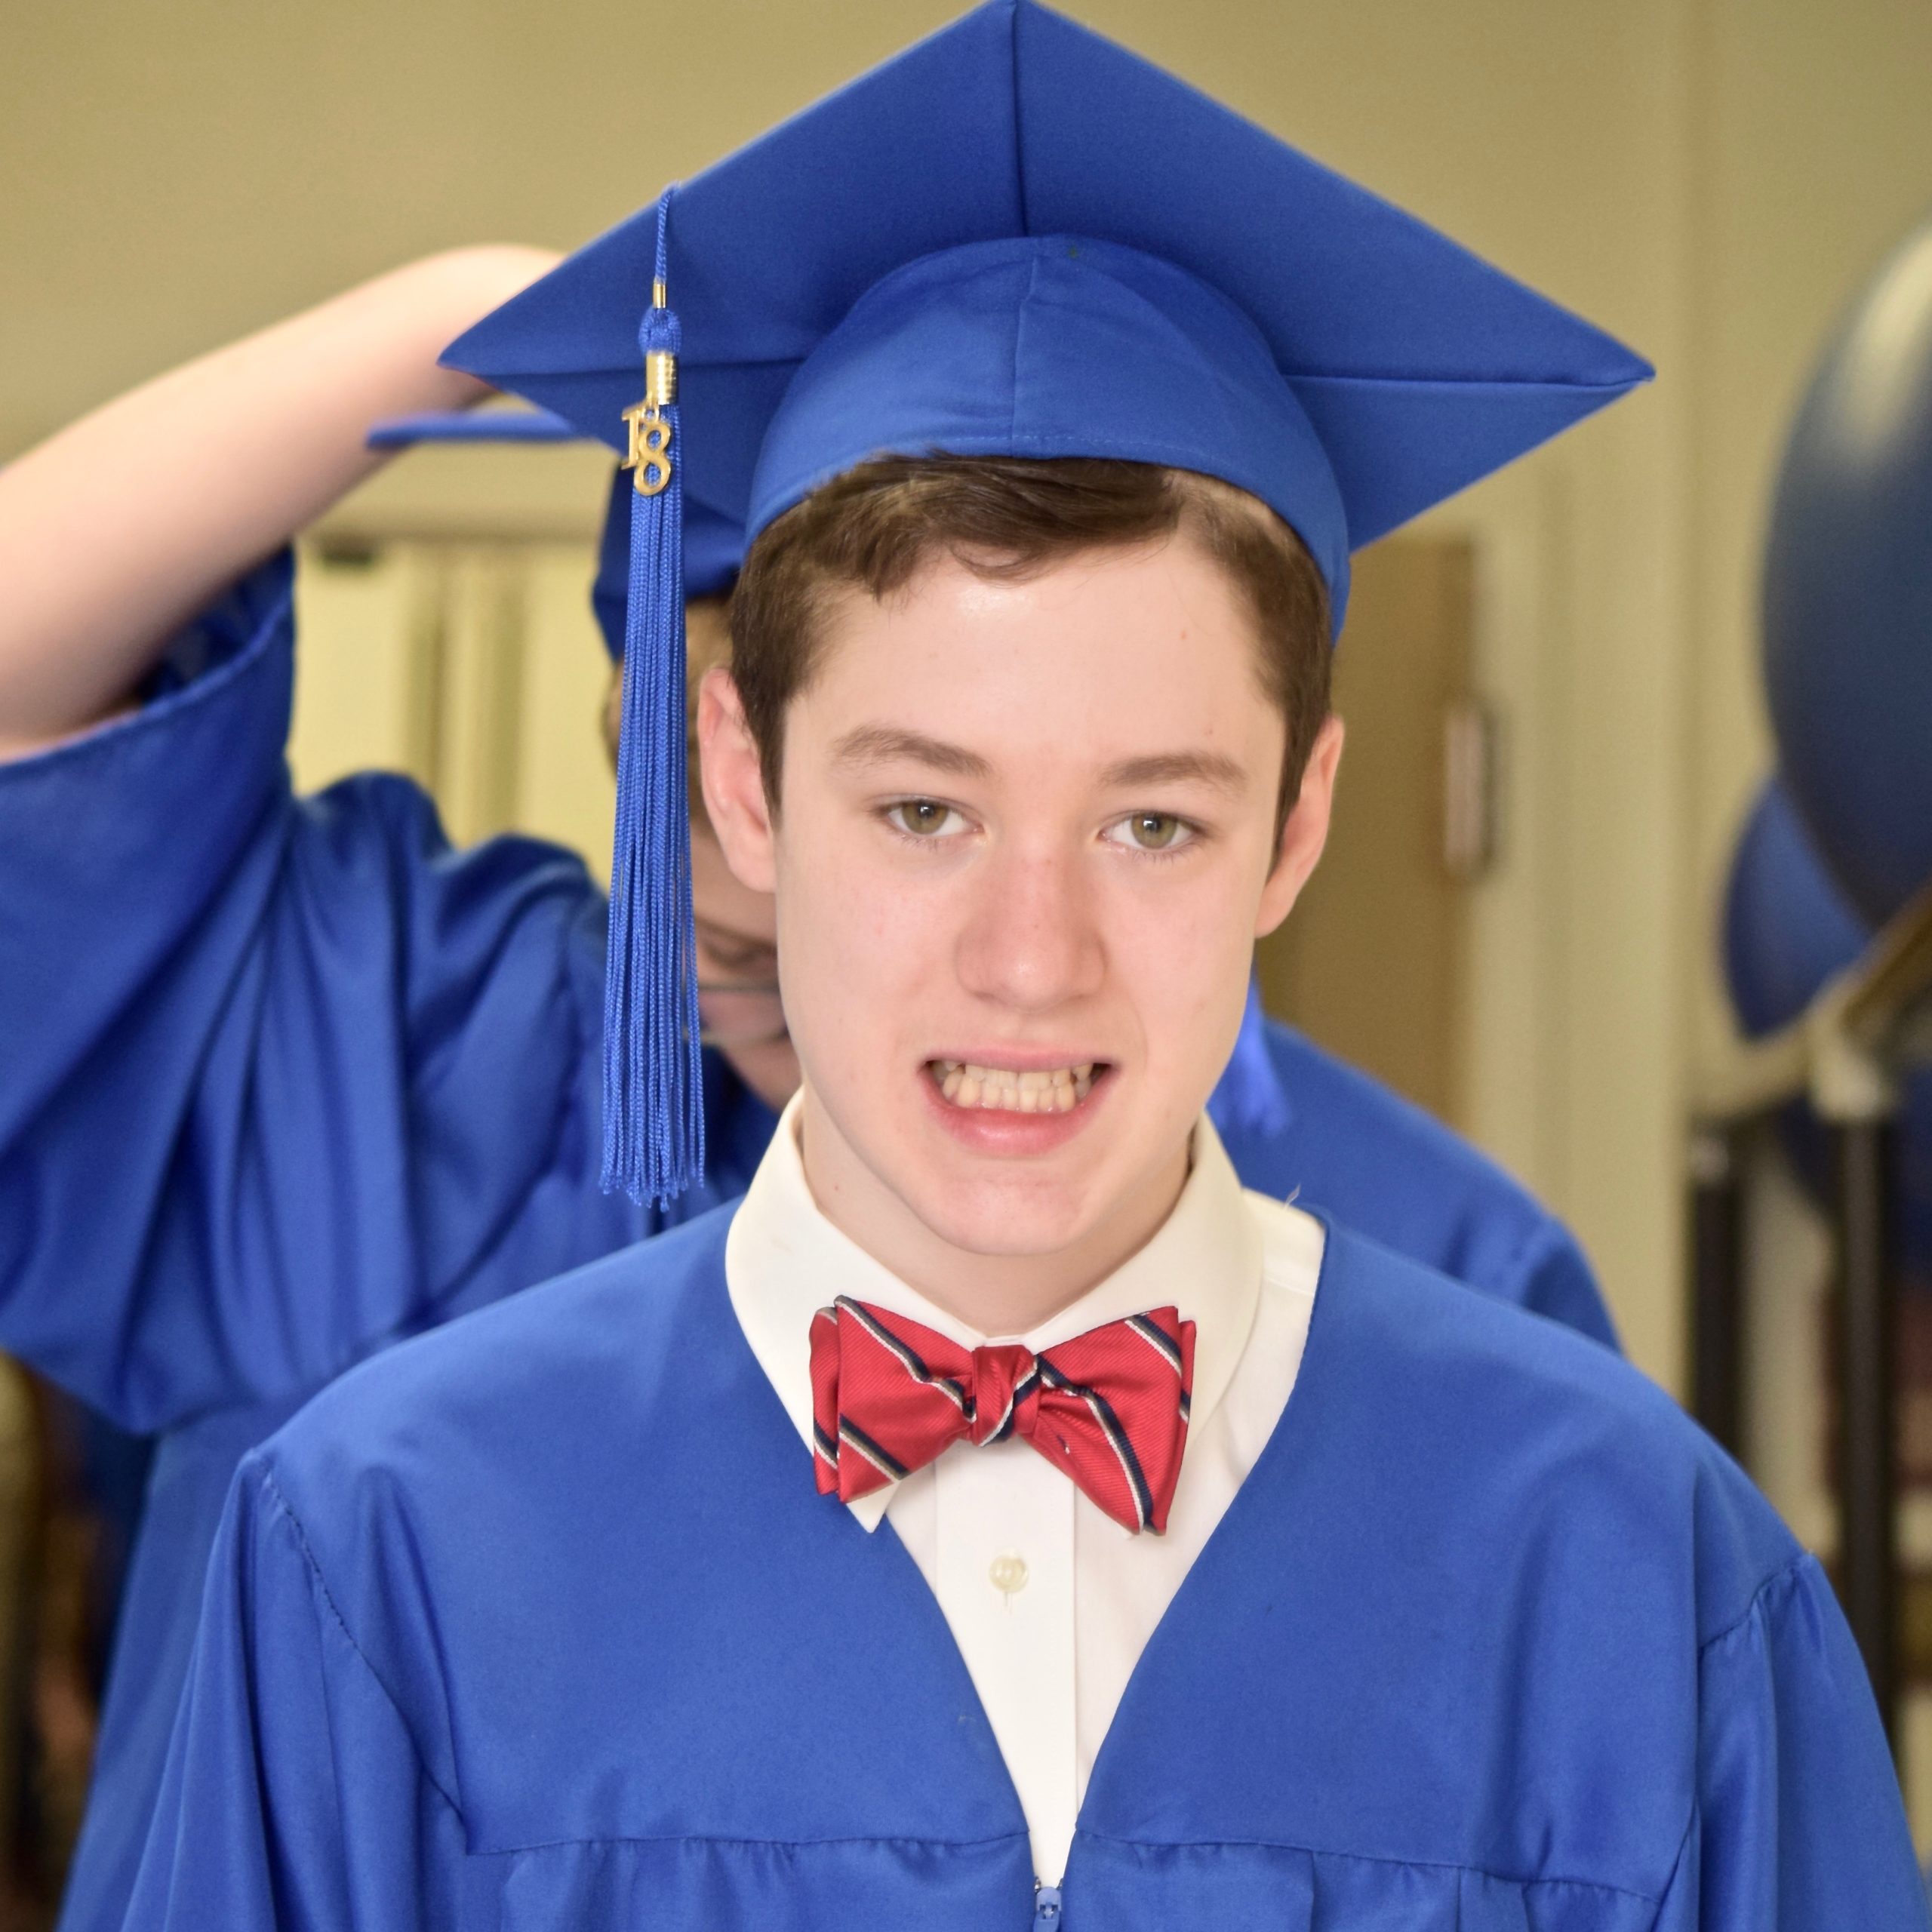 Middle School student in cap and gown